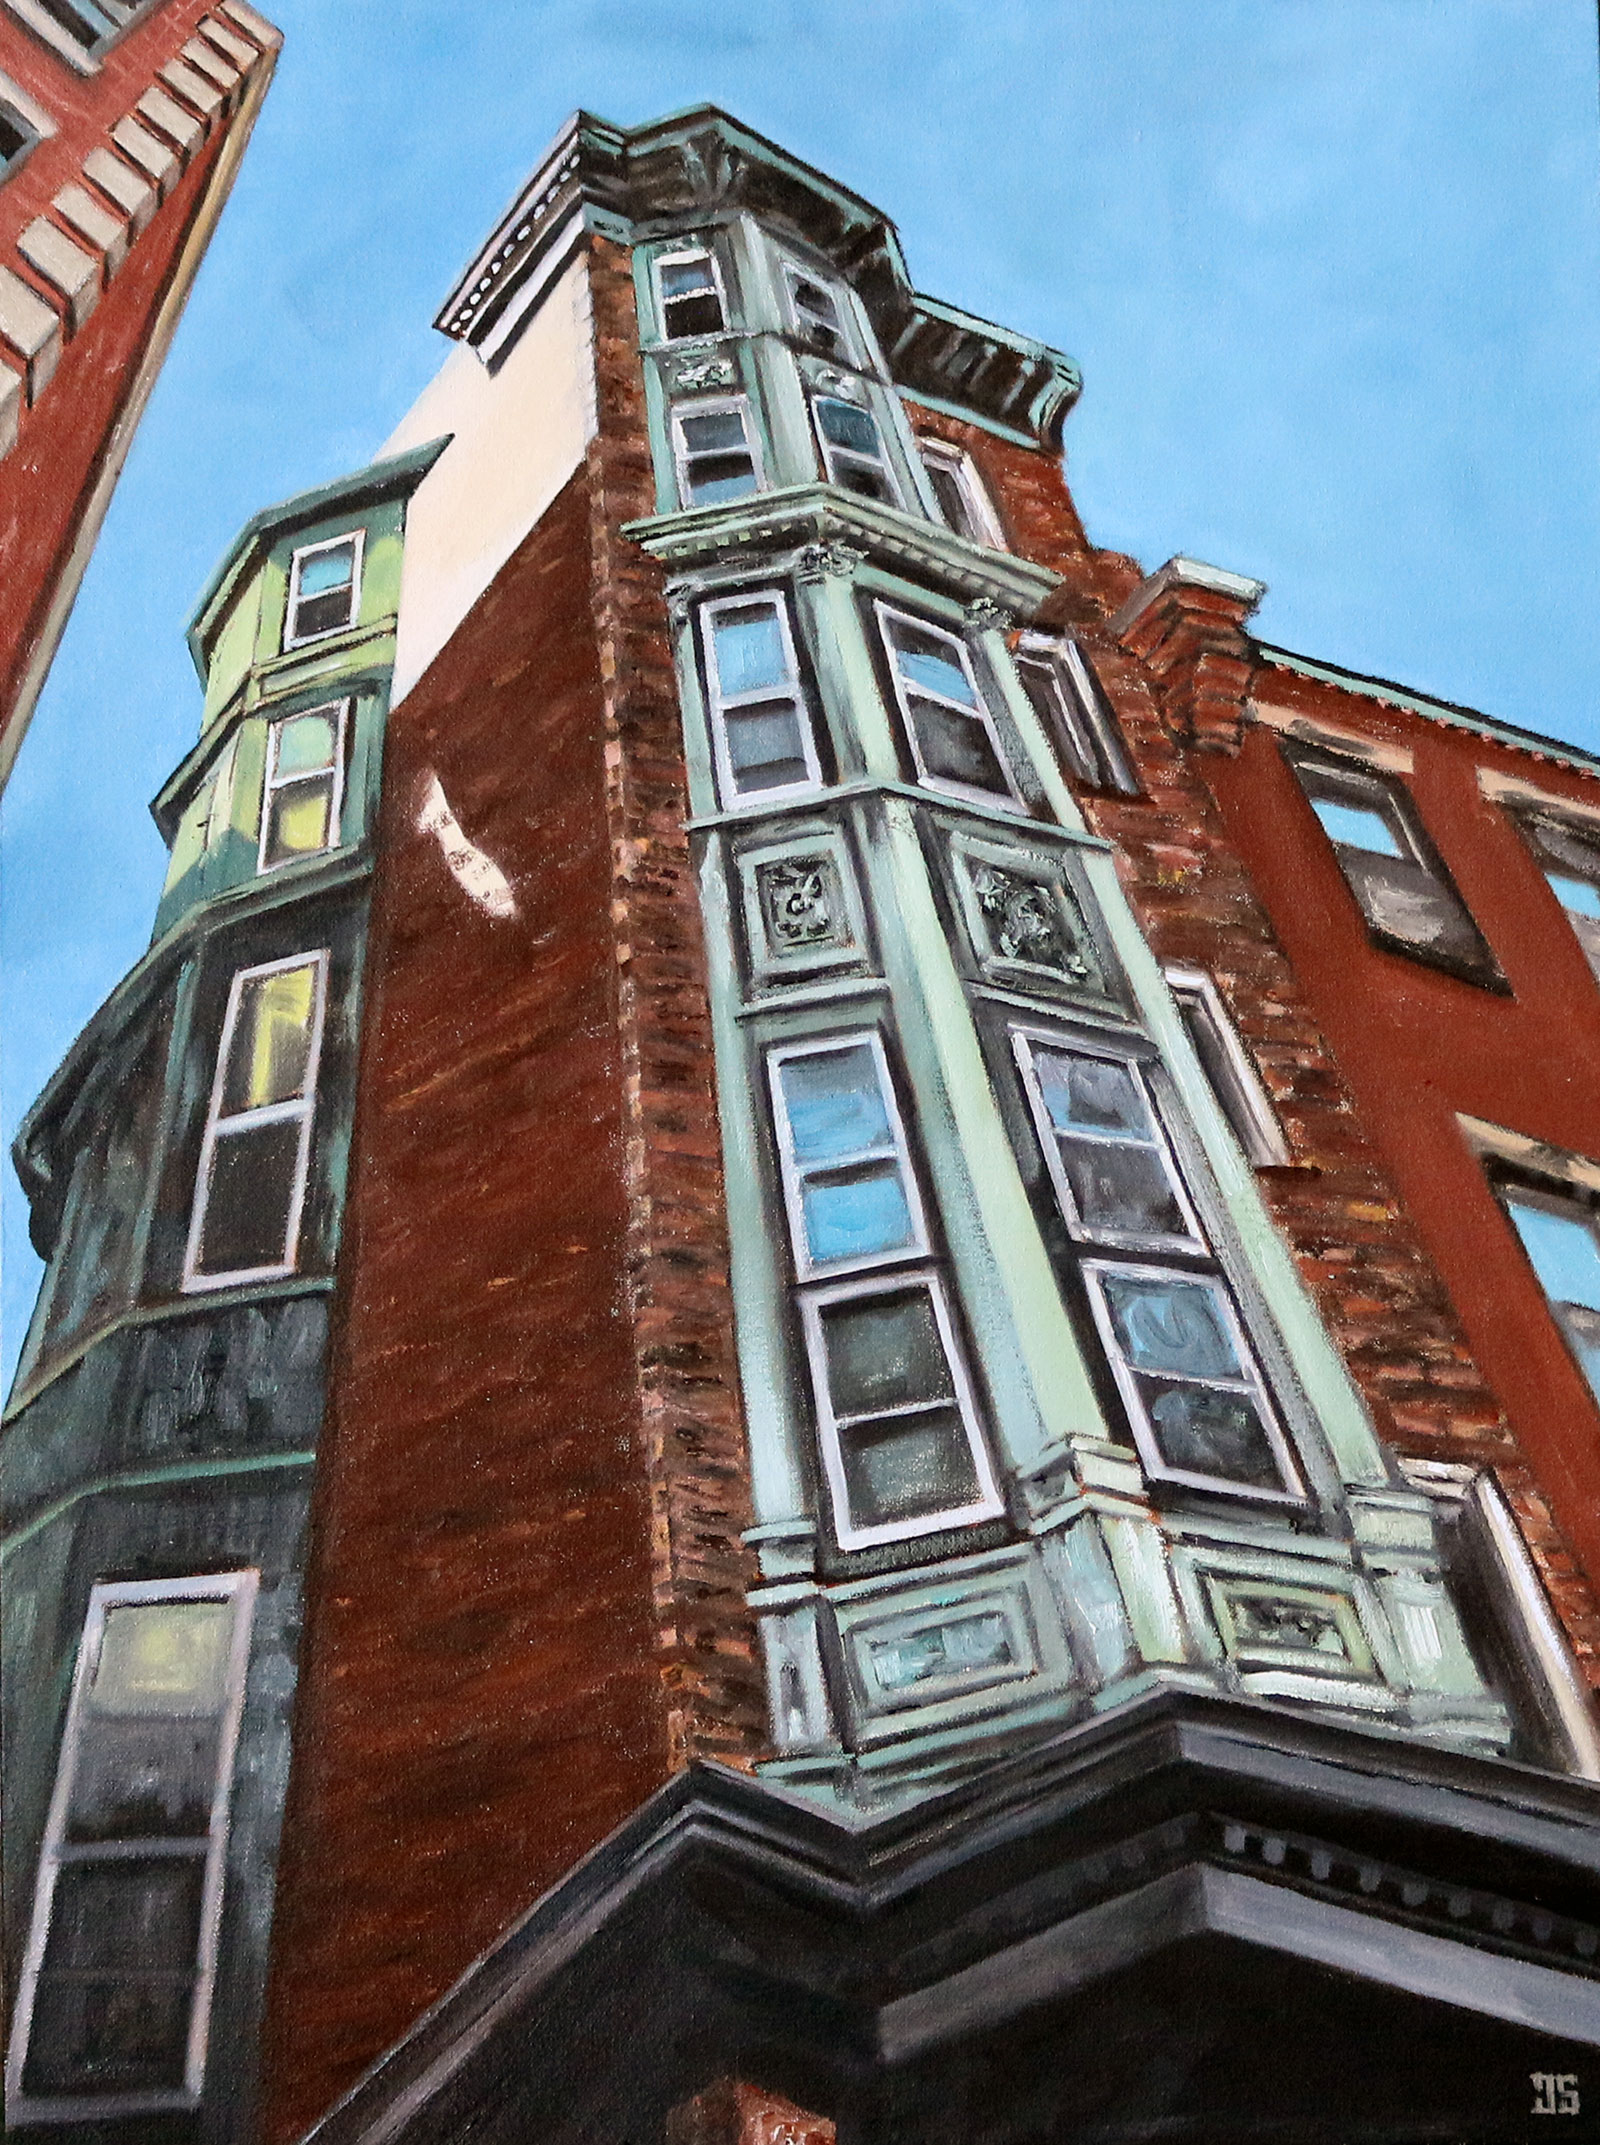 230 Hanover Street, North End, Boston by Jeffrey Dale Starr